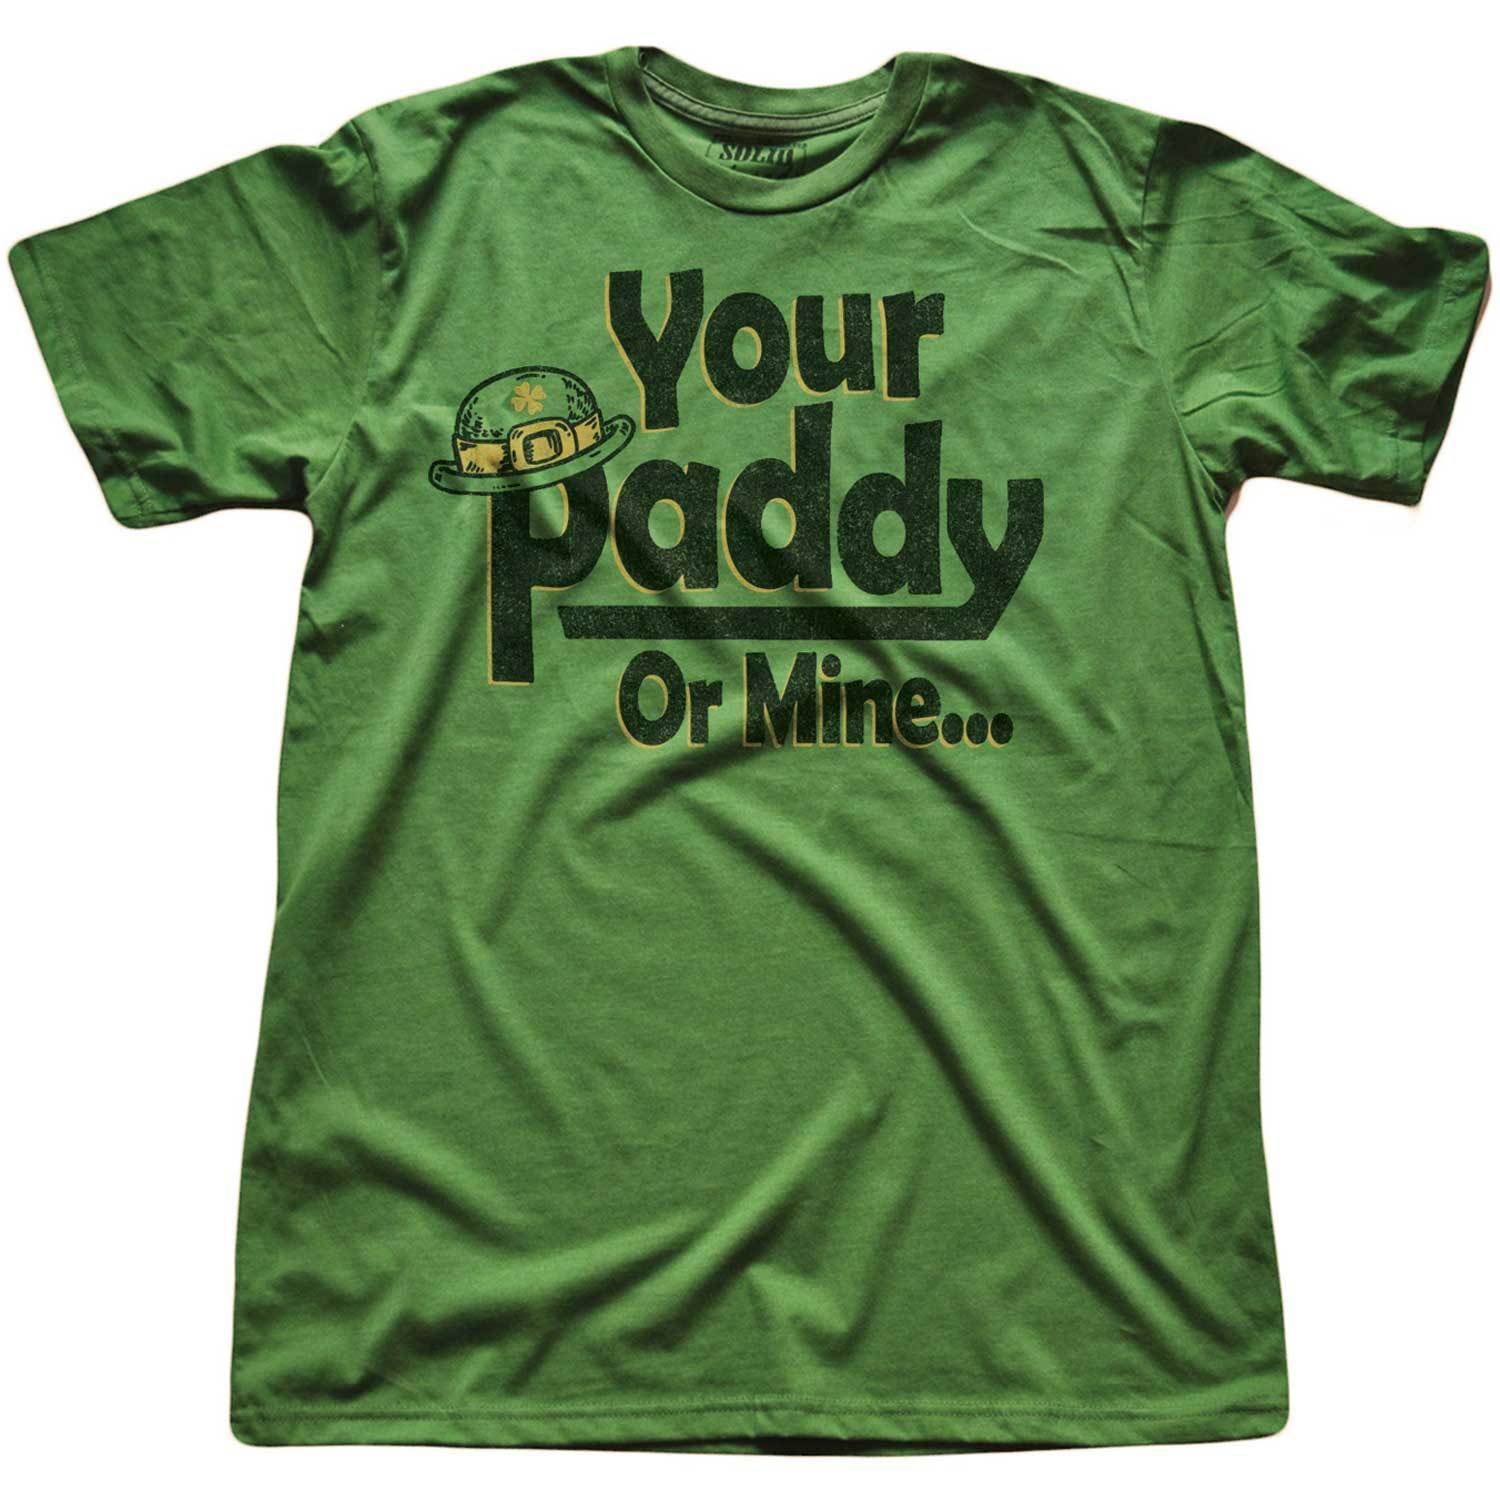 Men's Your Paddy Or Mine Vintage Graphic T-Shirt | Funny St Patricks Day Soft Tee | Solid Threads